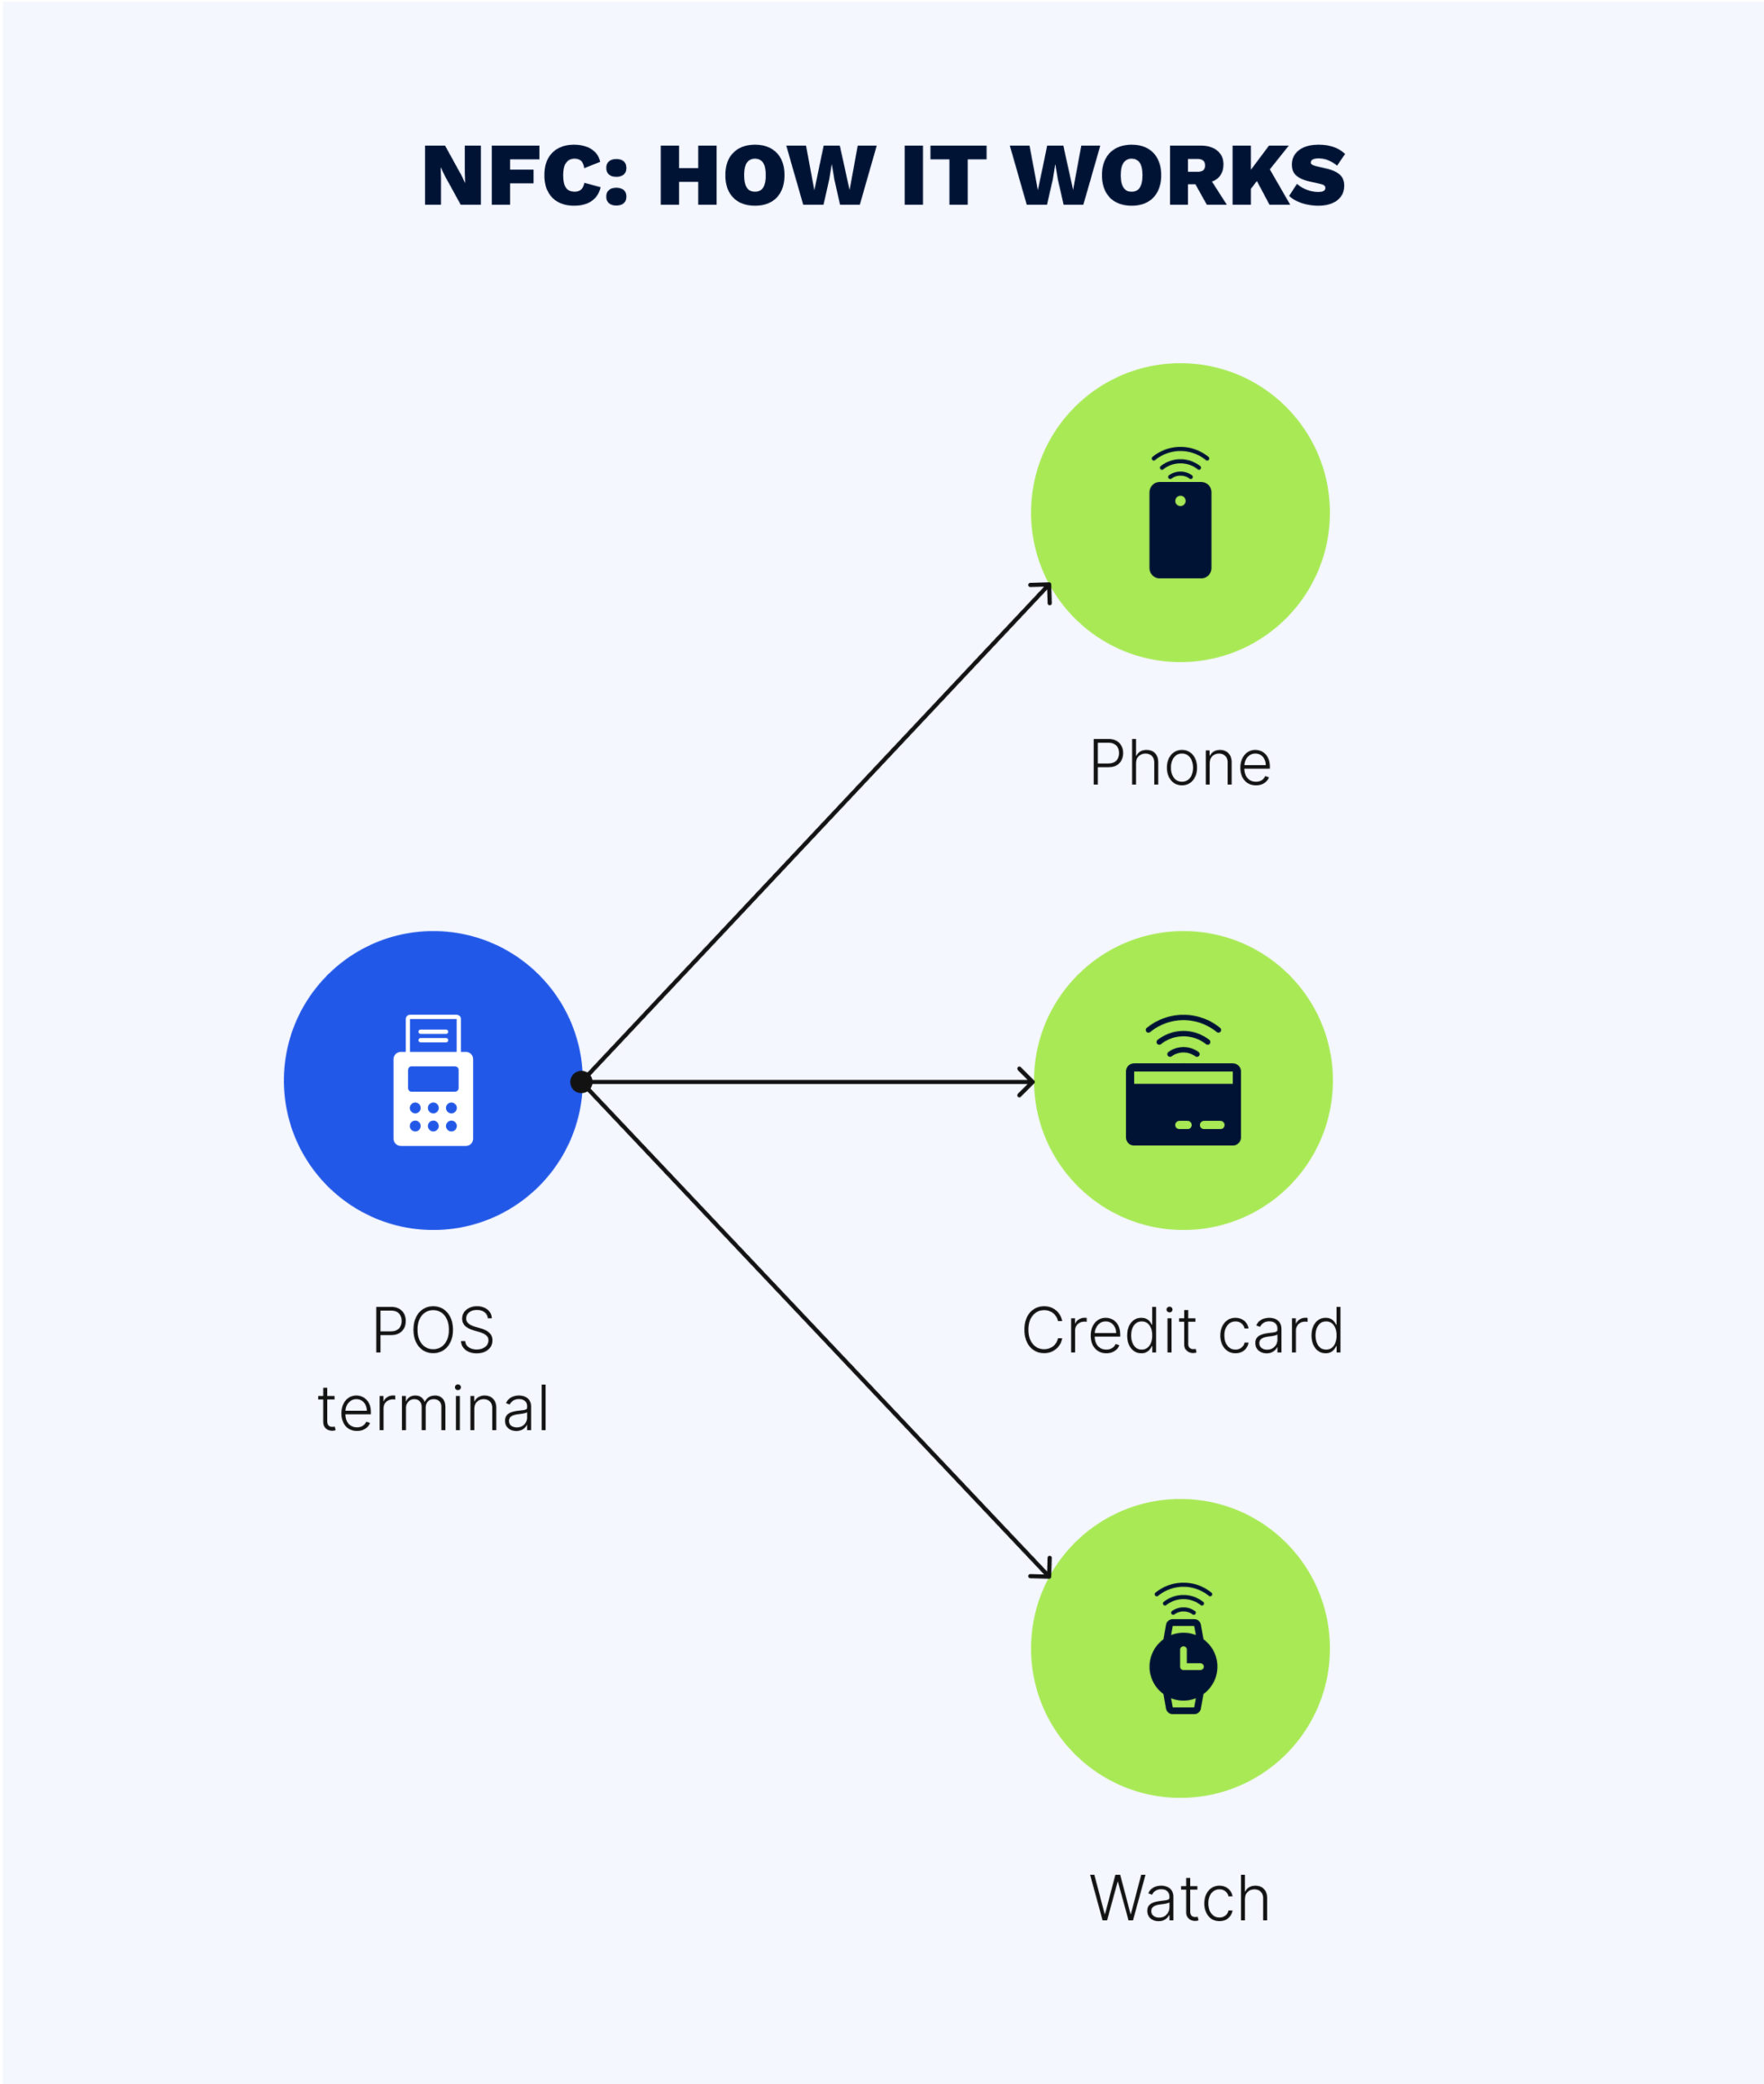 NFC retail applications